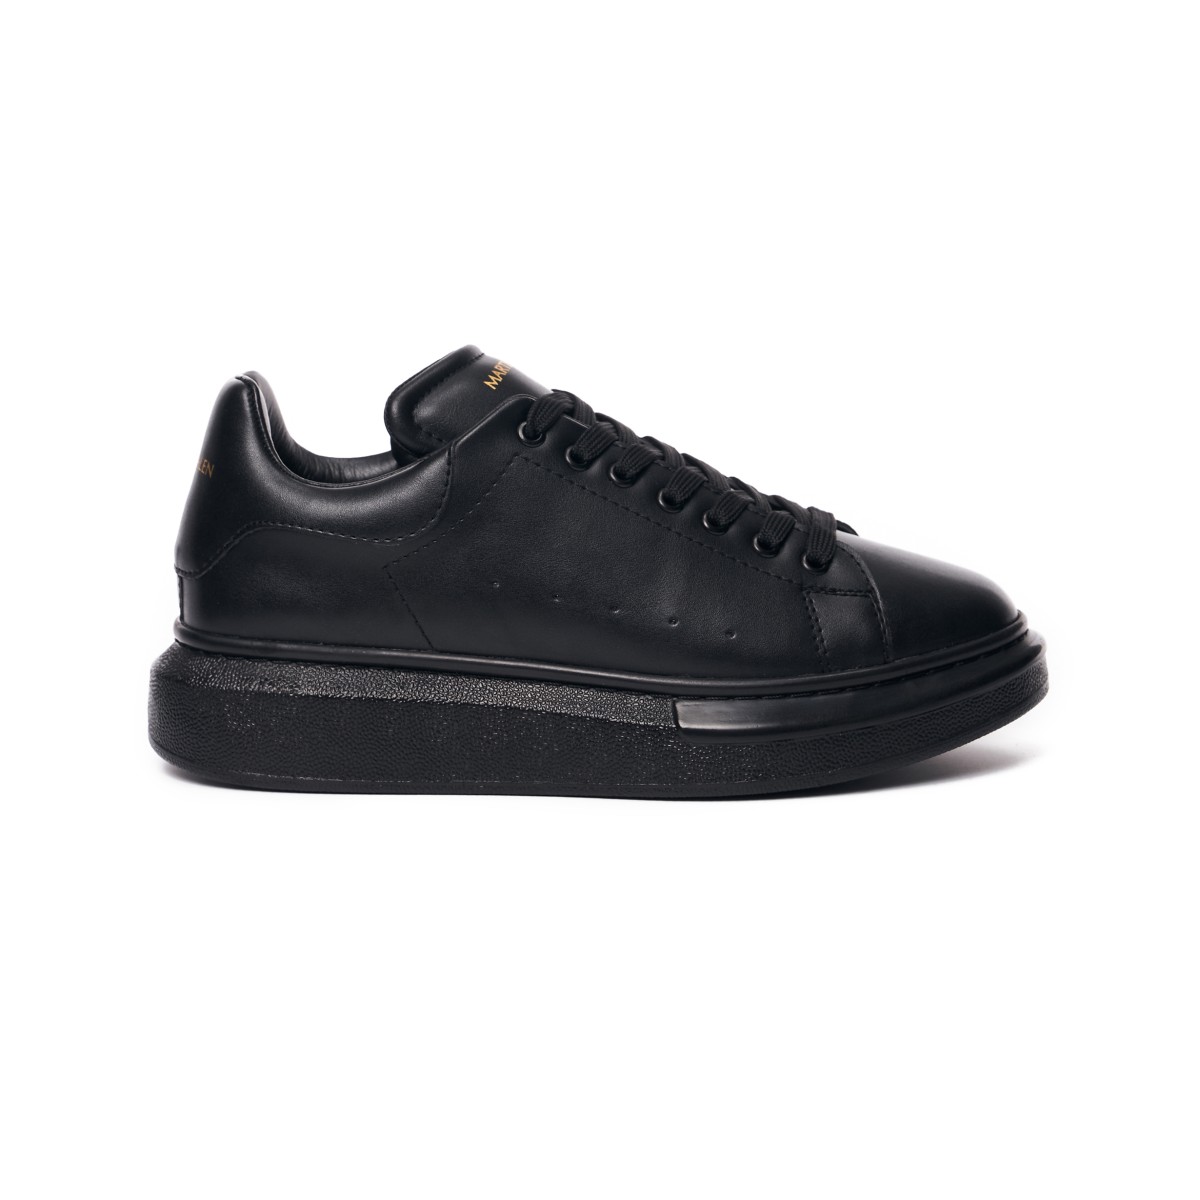 Chunky Sneakers Shoes All Black | Martin Valen